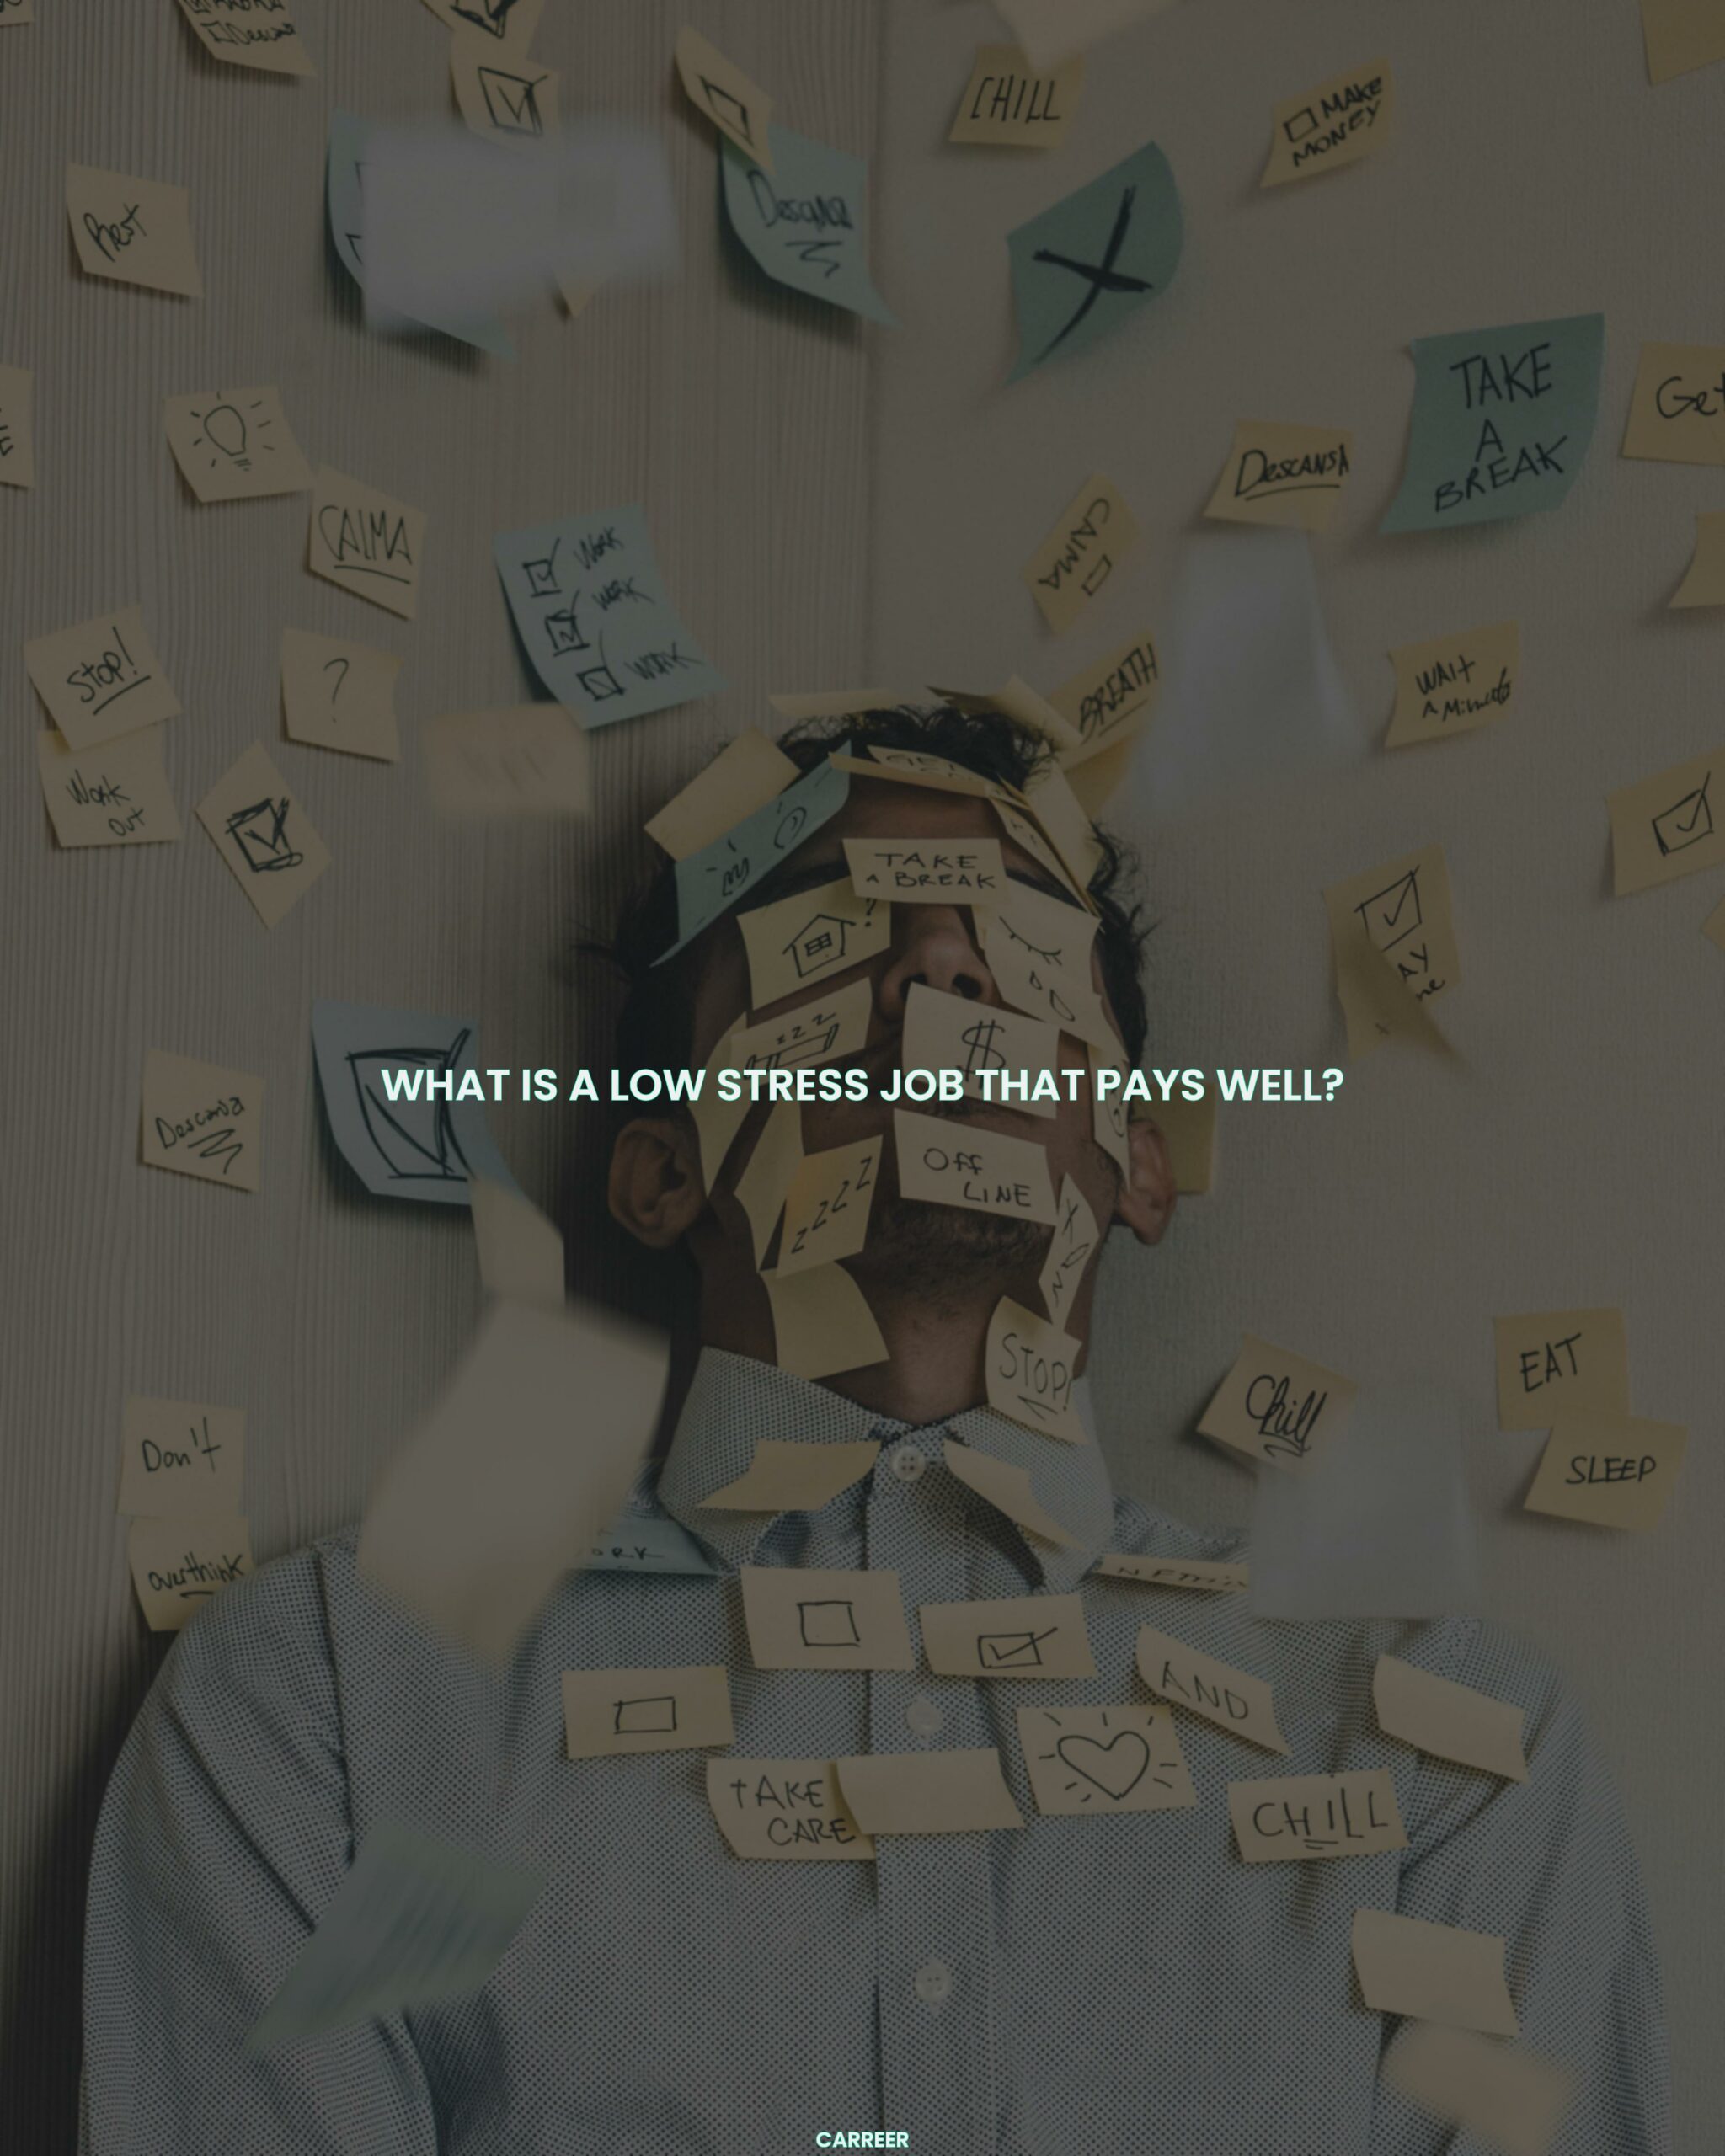 What is a low stress job that pays well?